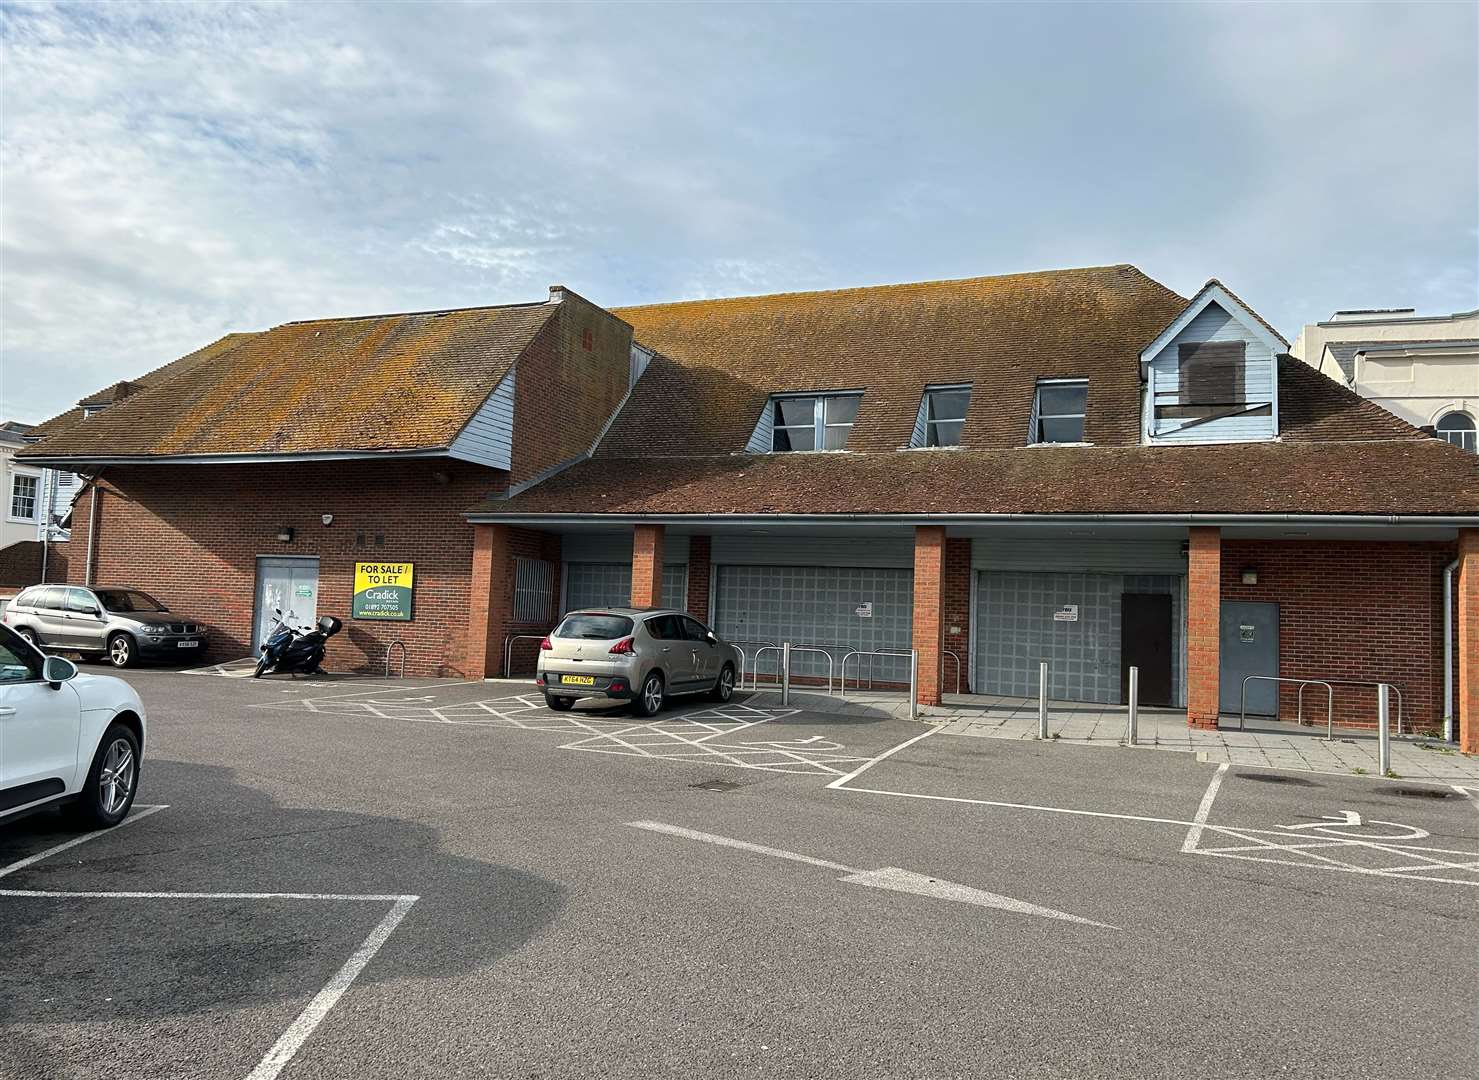 The large former Aldi building in Hythe has now been left empty for four years